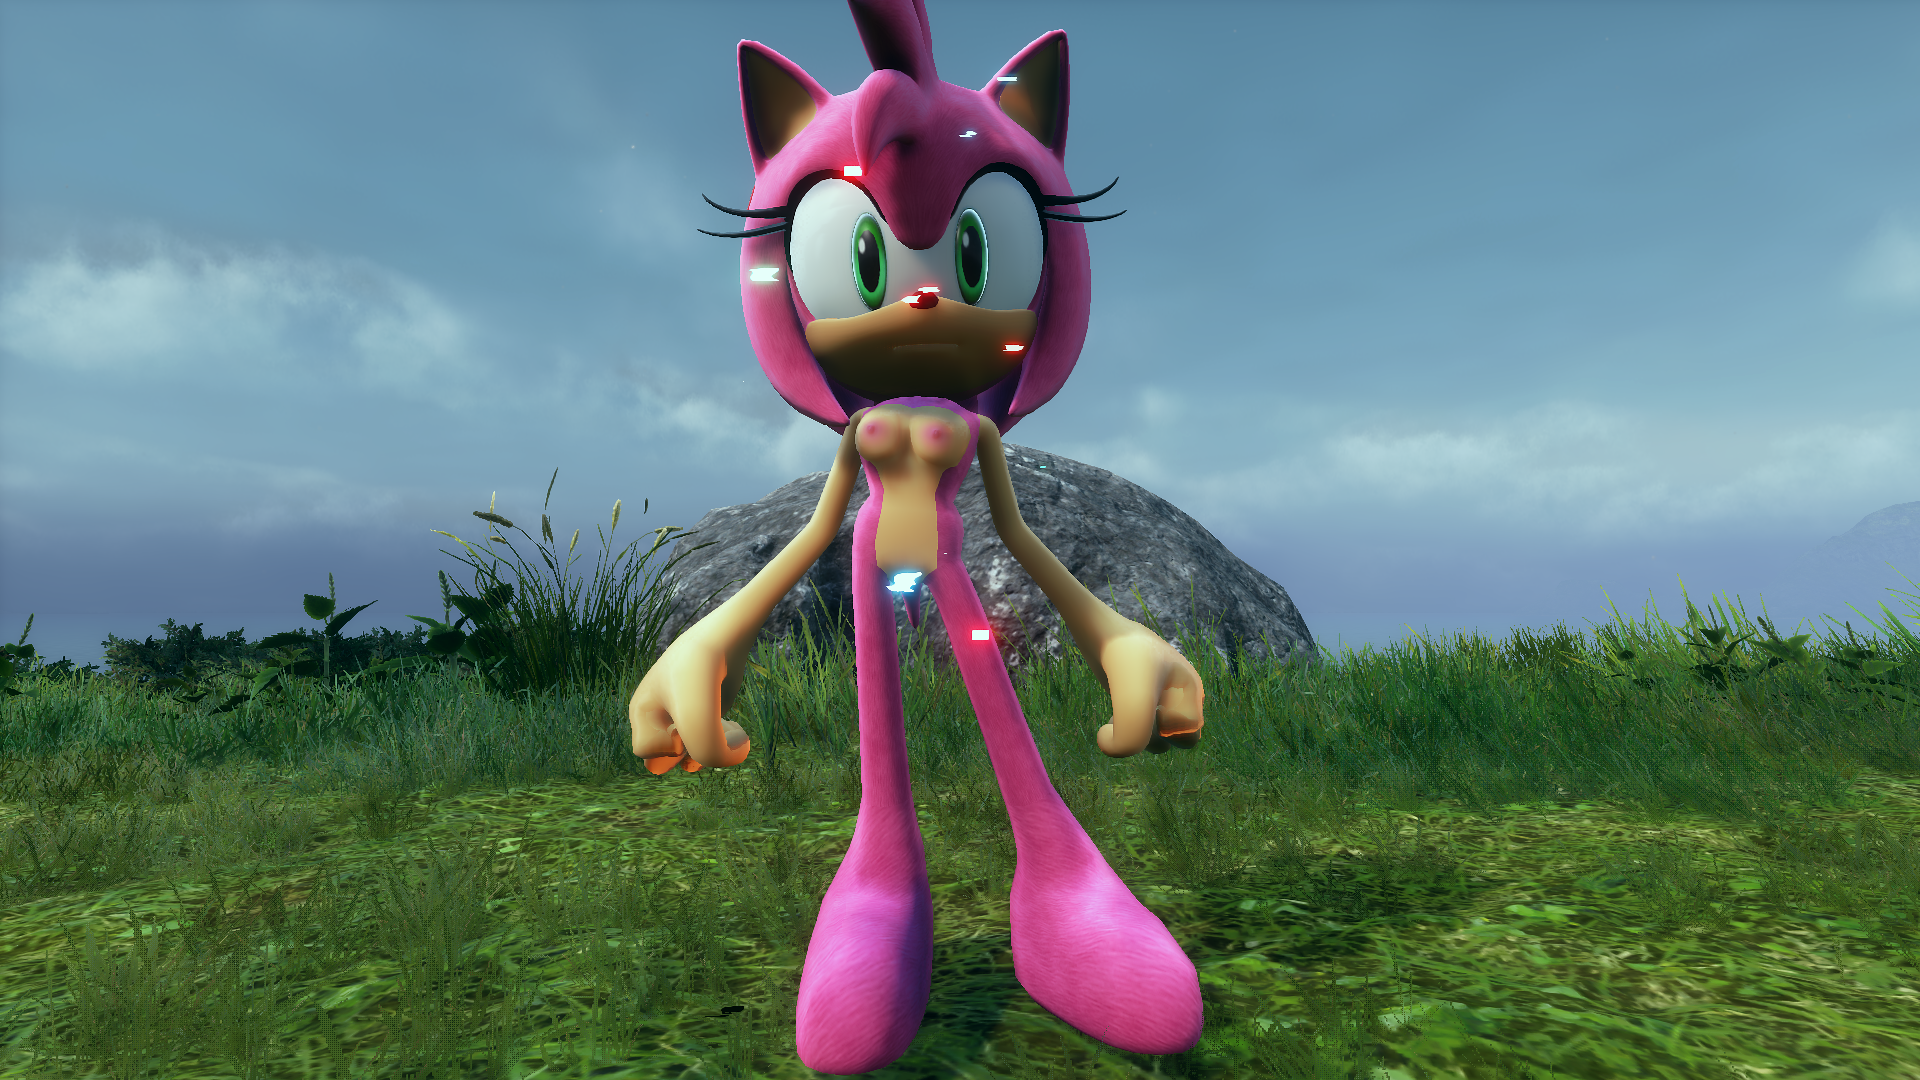 Sonic frontiers Modding? - Page 3 - Adult Gaming - LoversLab